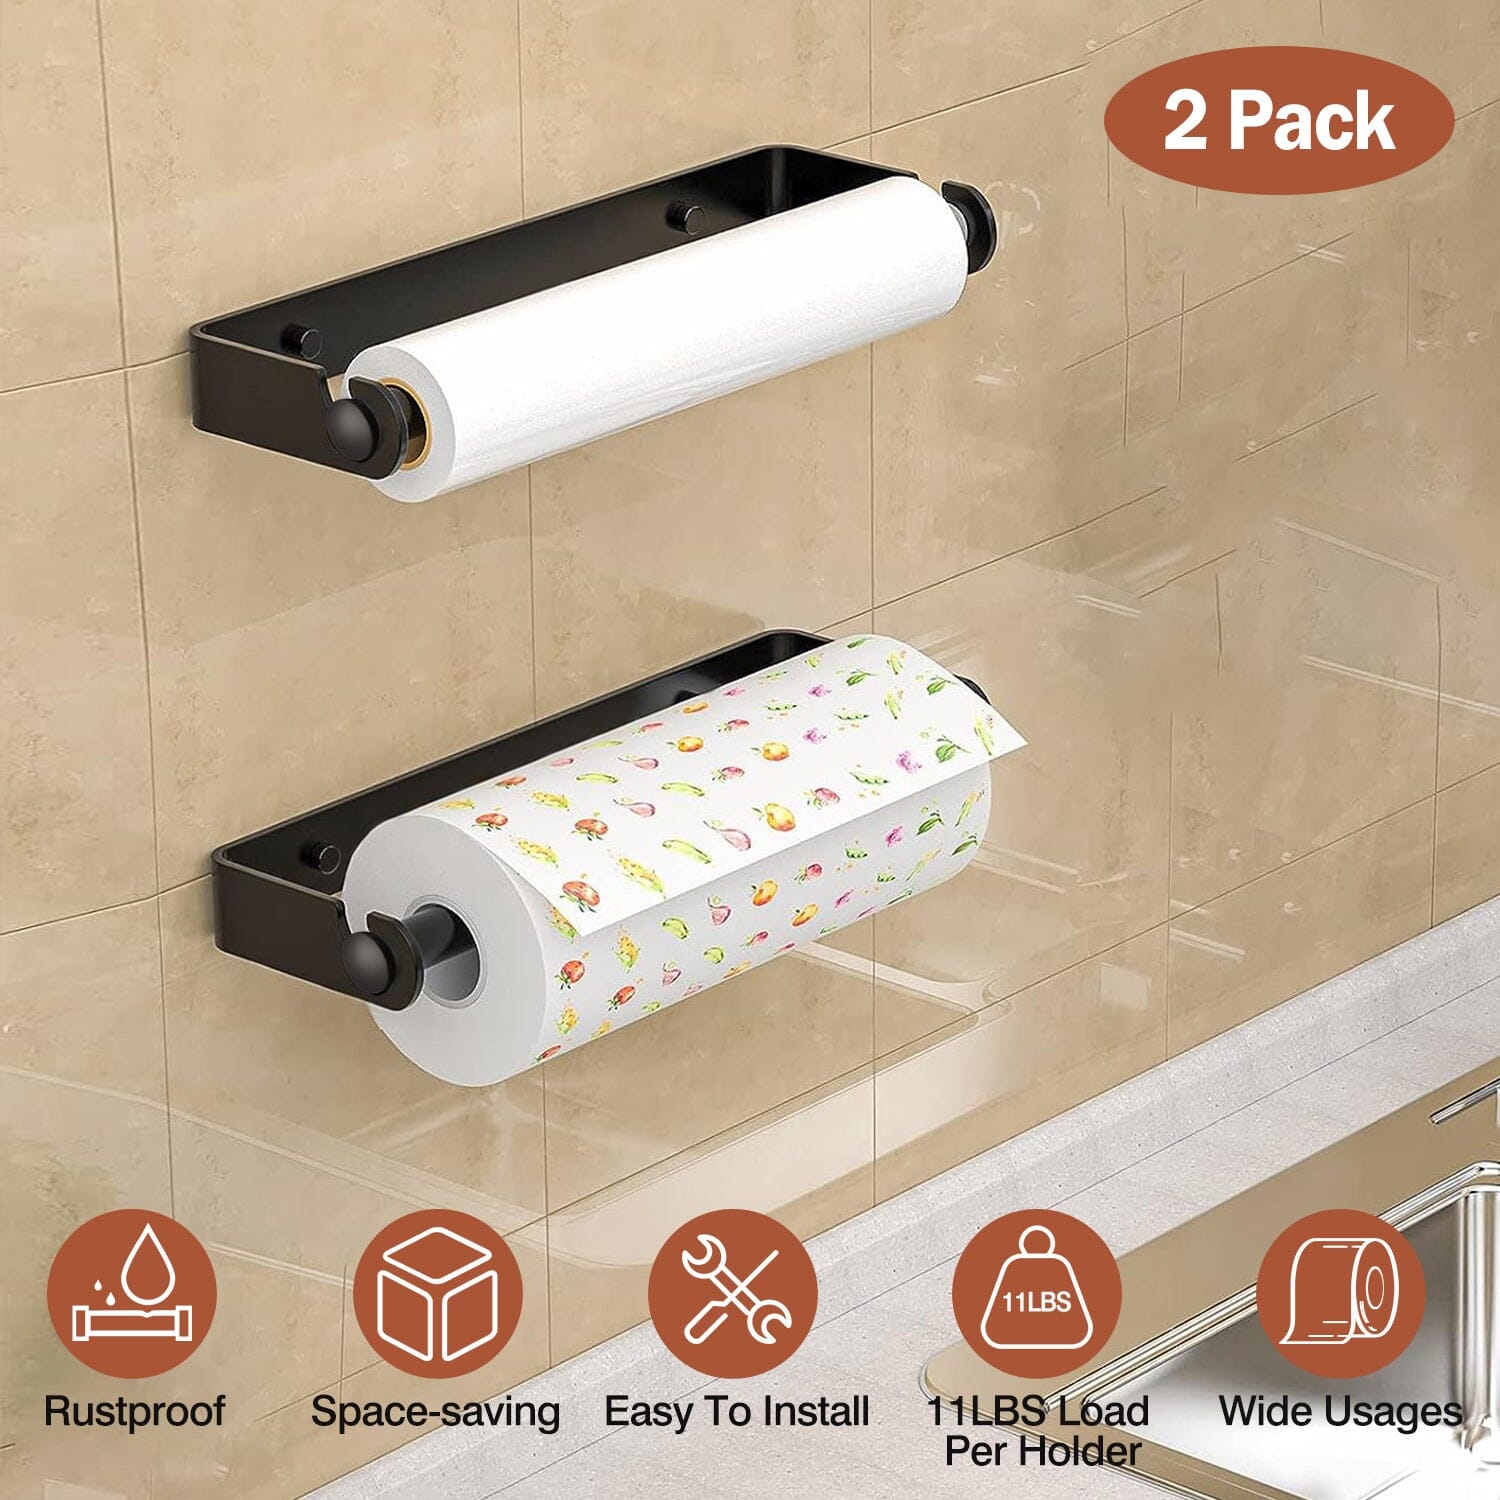 2-Pack: Wall Mounted Paper Towel Holder Under Cabinet